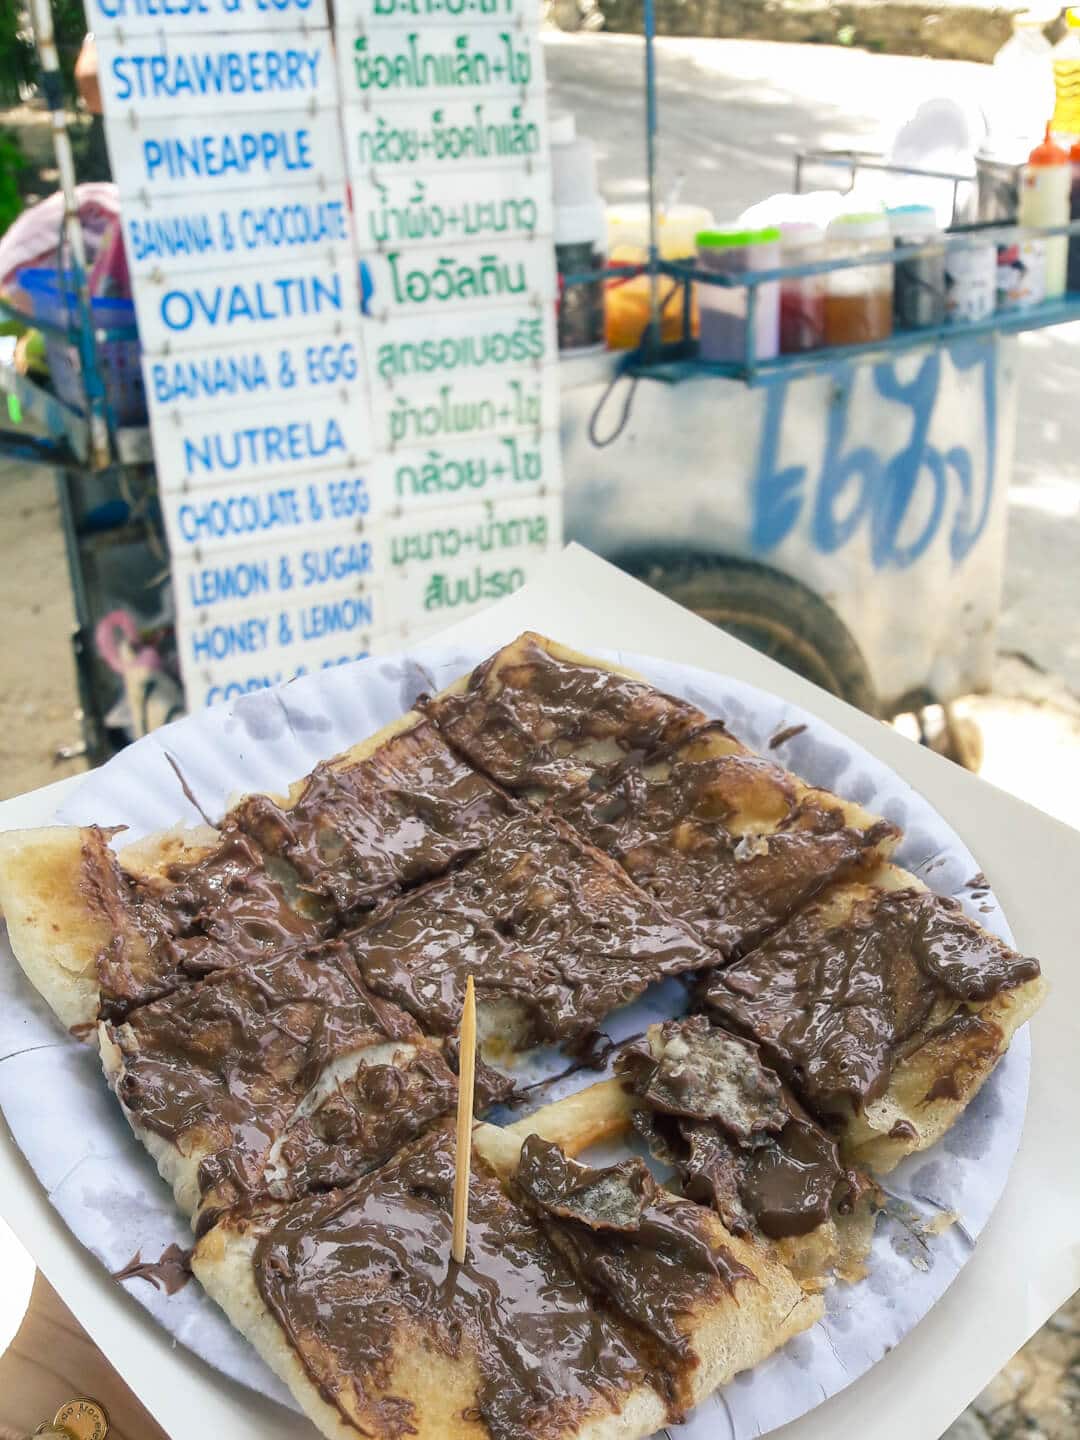 Nutella Roti with the vendor sign in the background on Lung Dum Beach on Koh Samet.